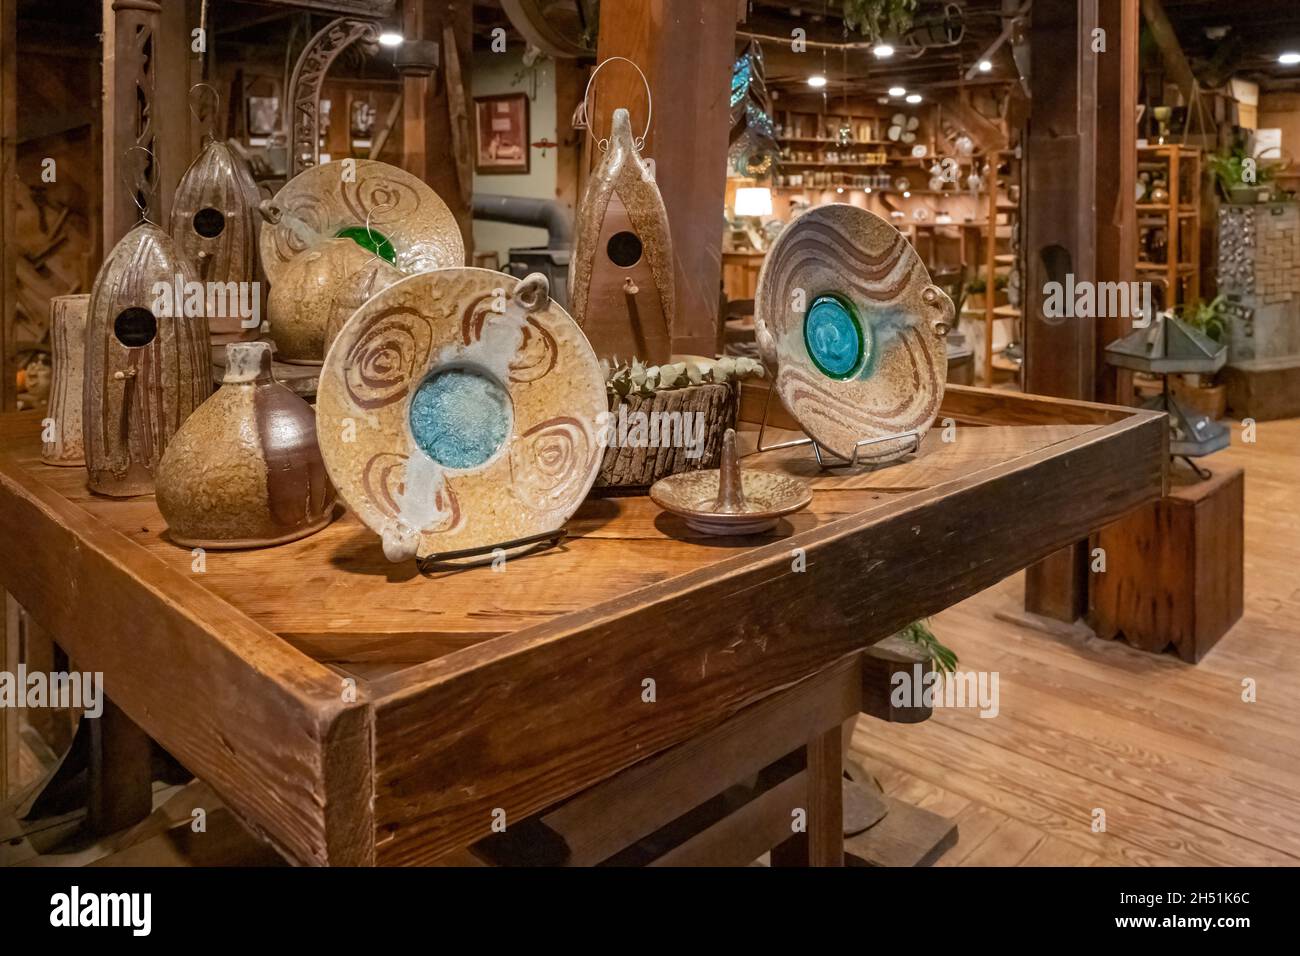 Mark of the Potter, located in the old Grandpa Watts gristmill in Clarkesville, Georgia, offers handmade fine pottery by local artisans. (USA) Stock Photo